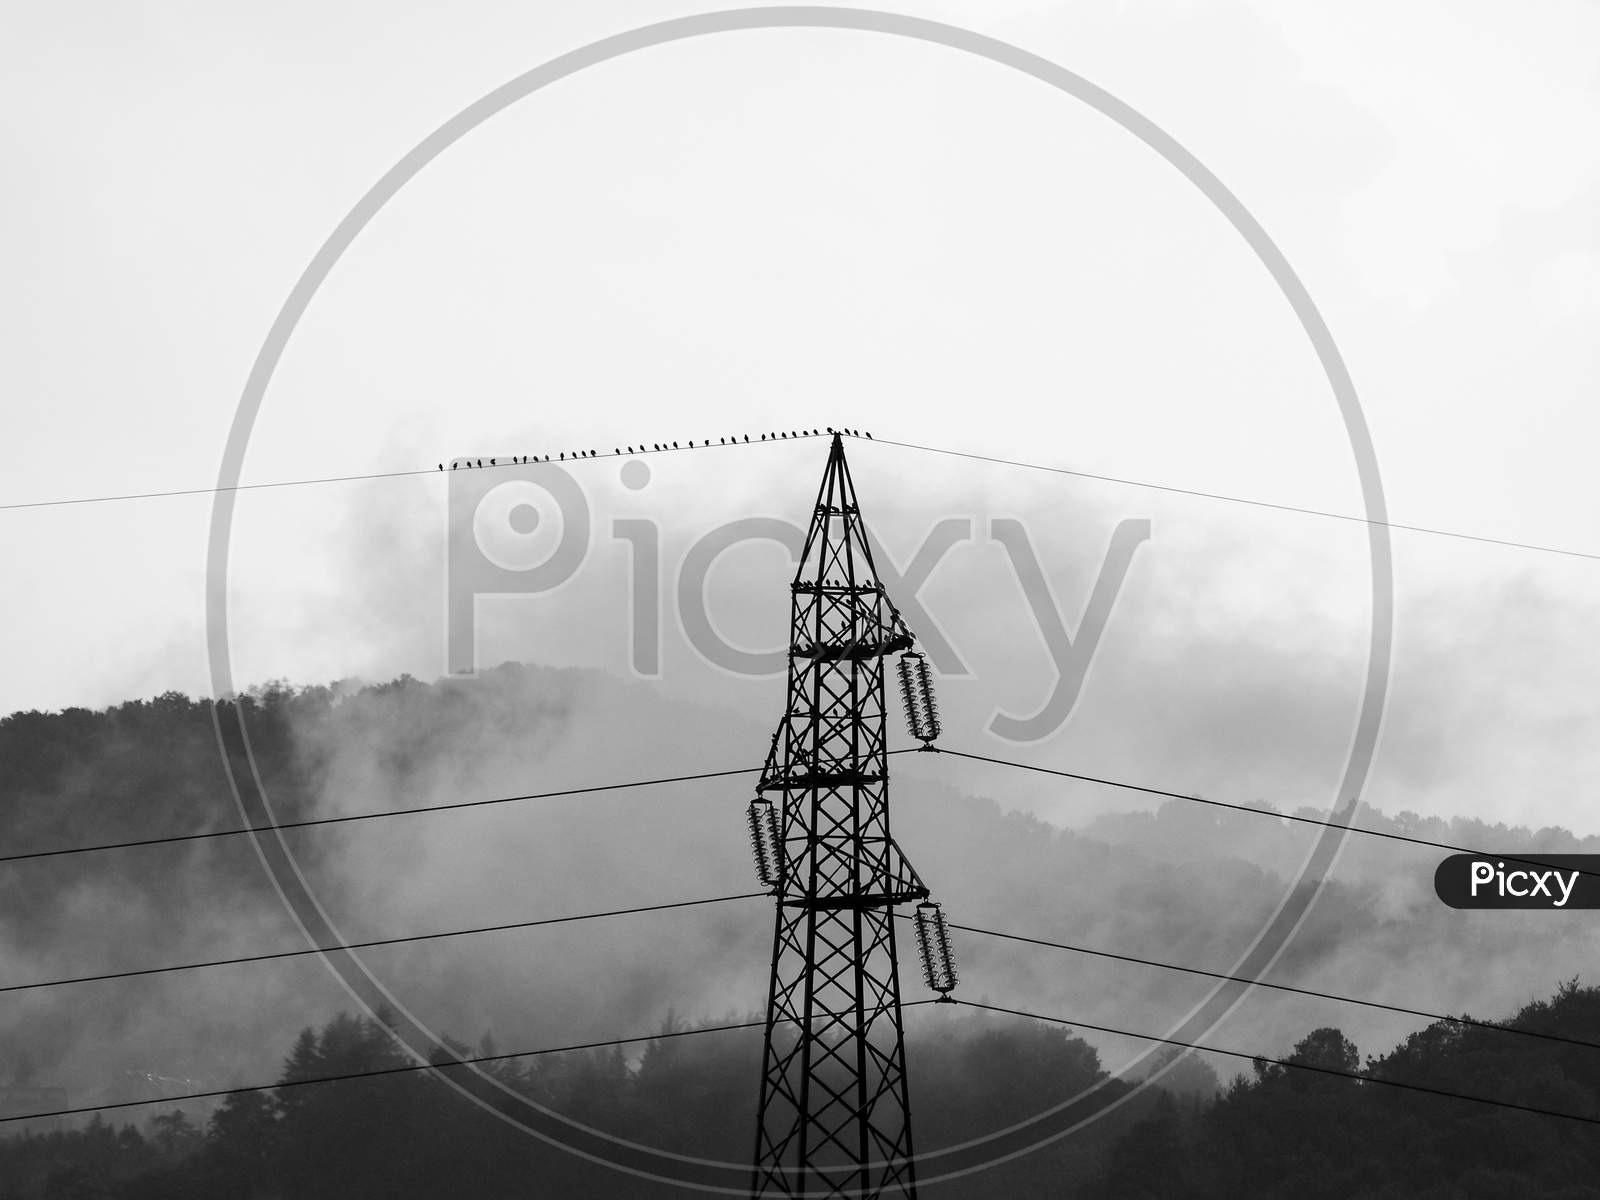 Transmission Line In Stormy Weather